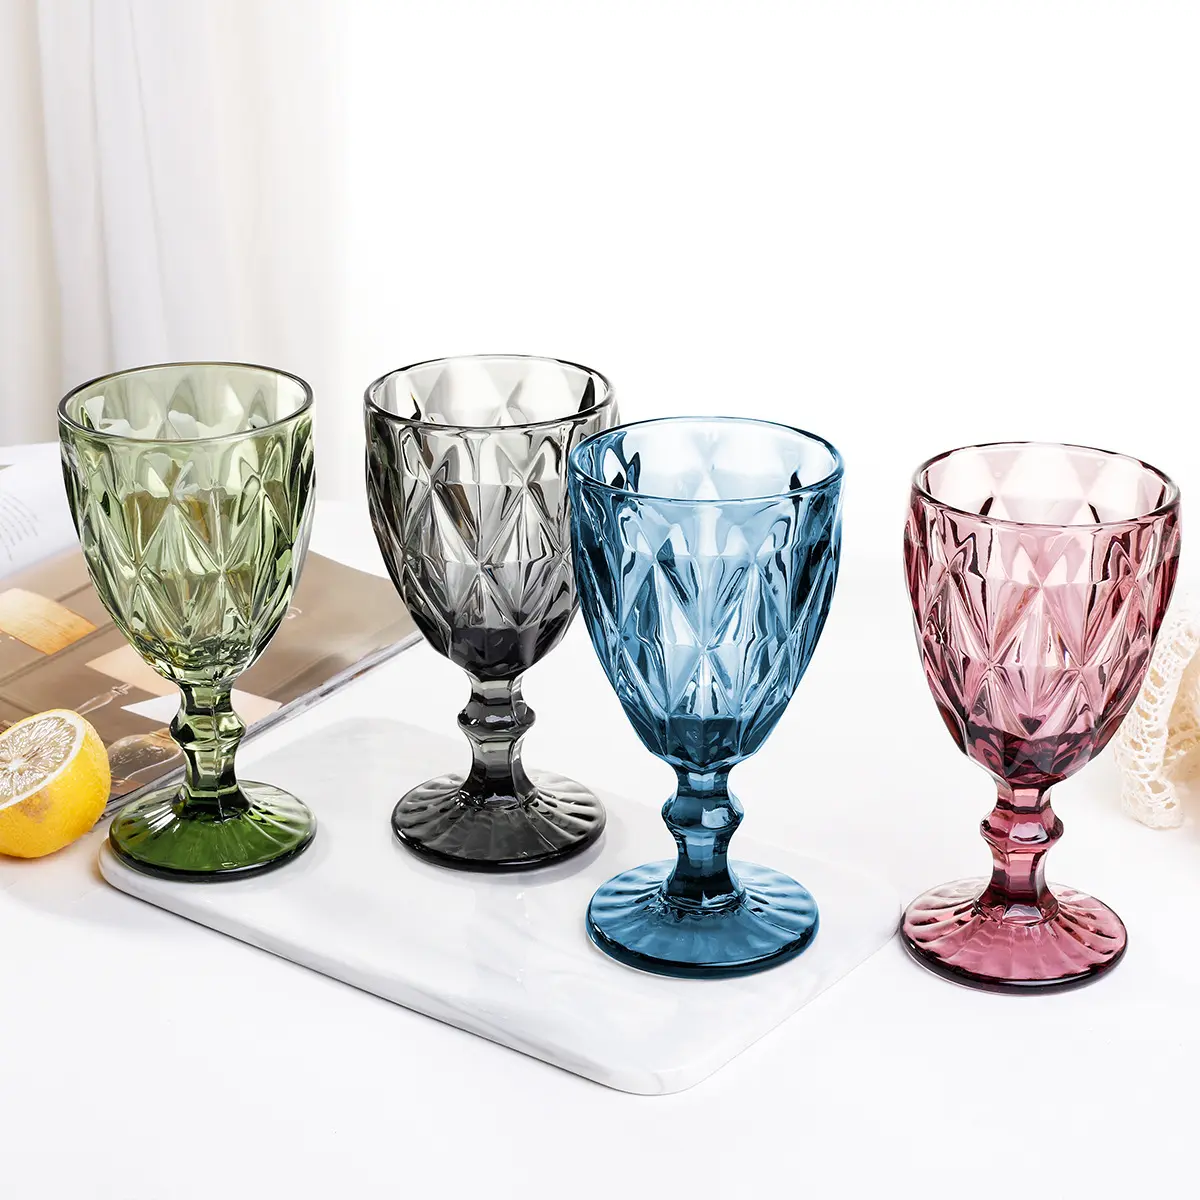 Vintage Cocktail Wine Glasses Cups Golden Edge Multi Colored Glassware Wedding Party Green Blue Purple Pink Goblet